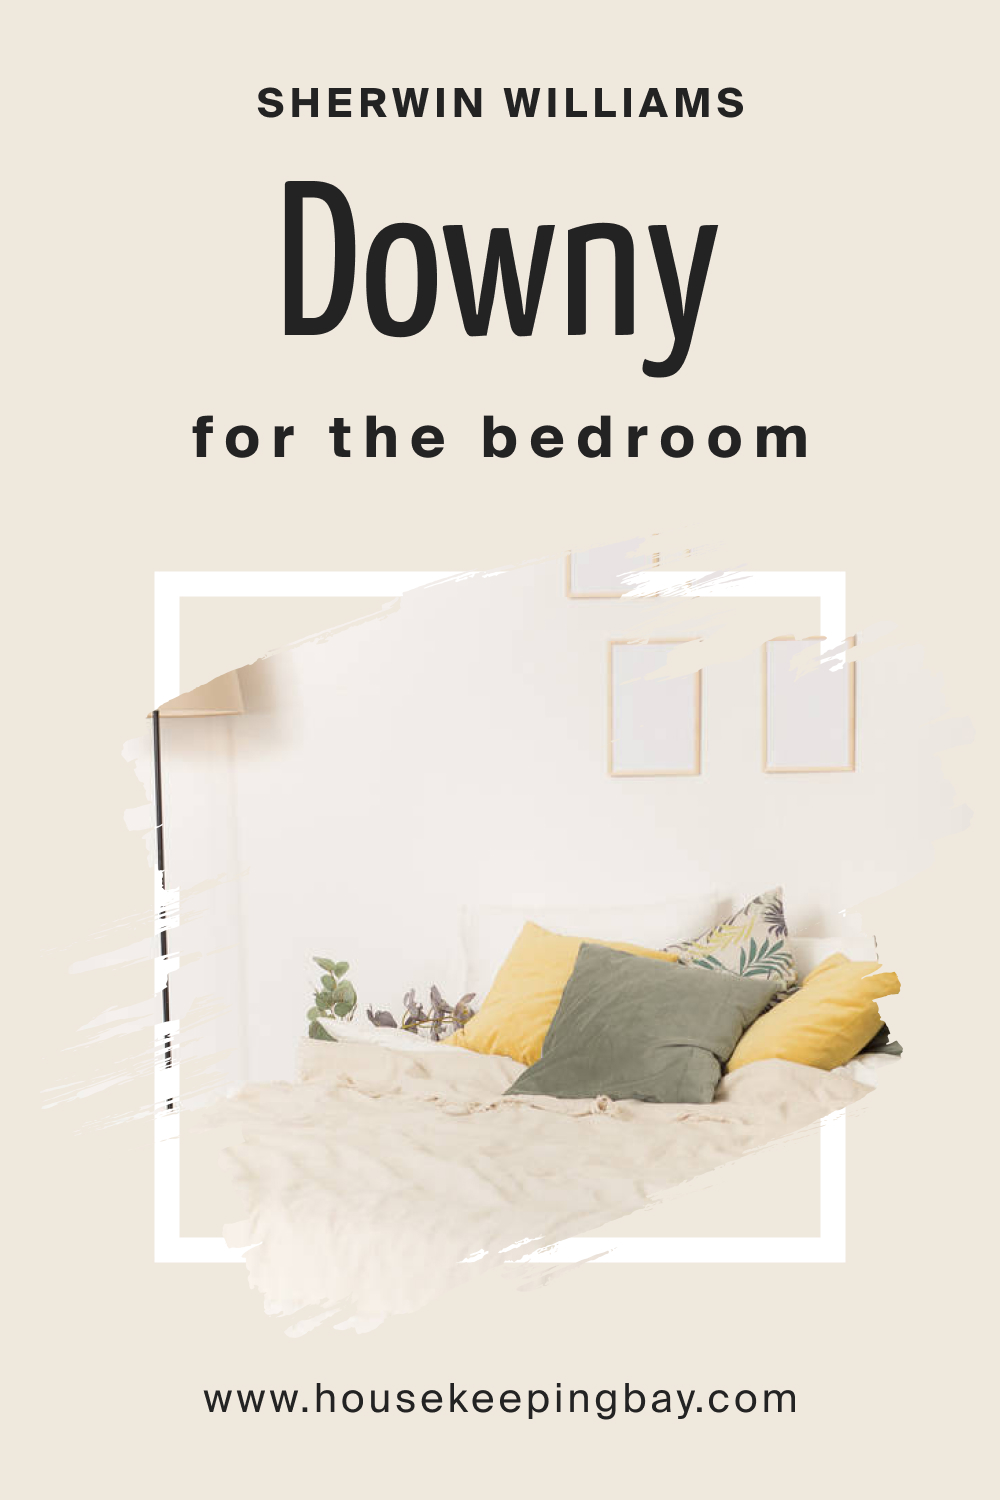 Sherwin Williams. SW Downy For the bedroom